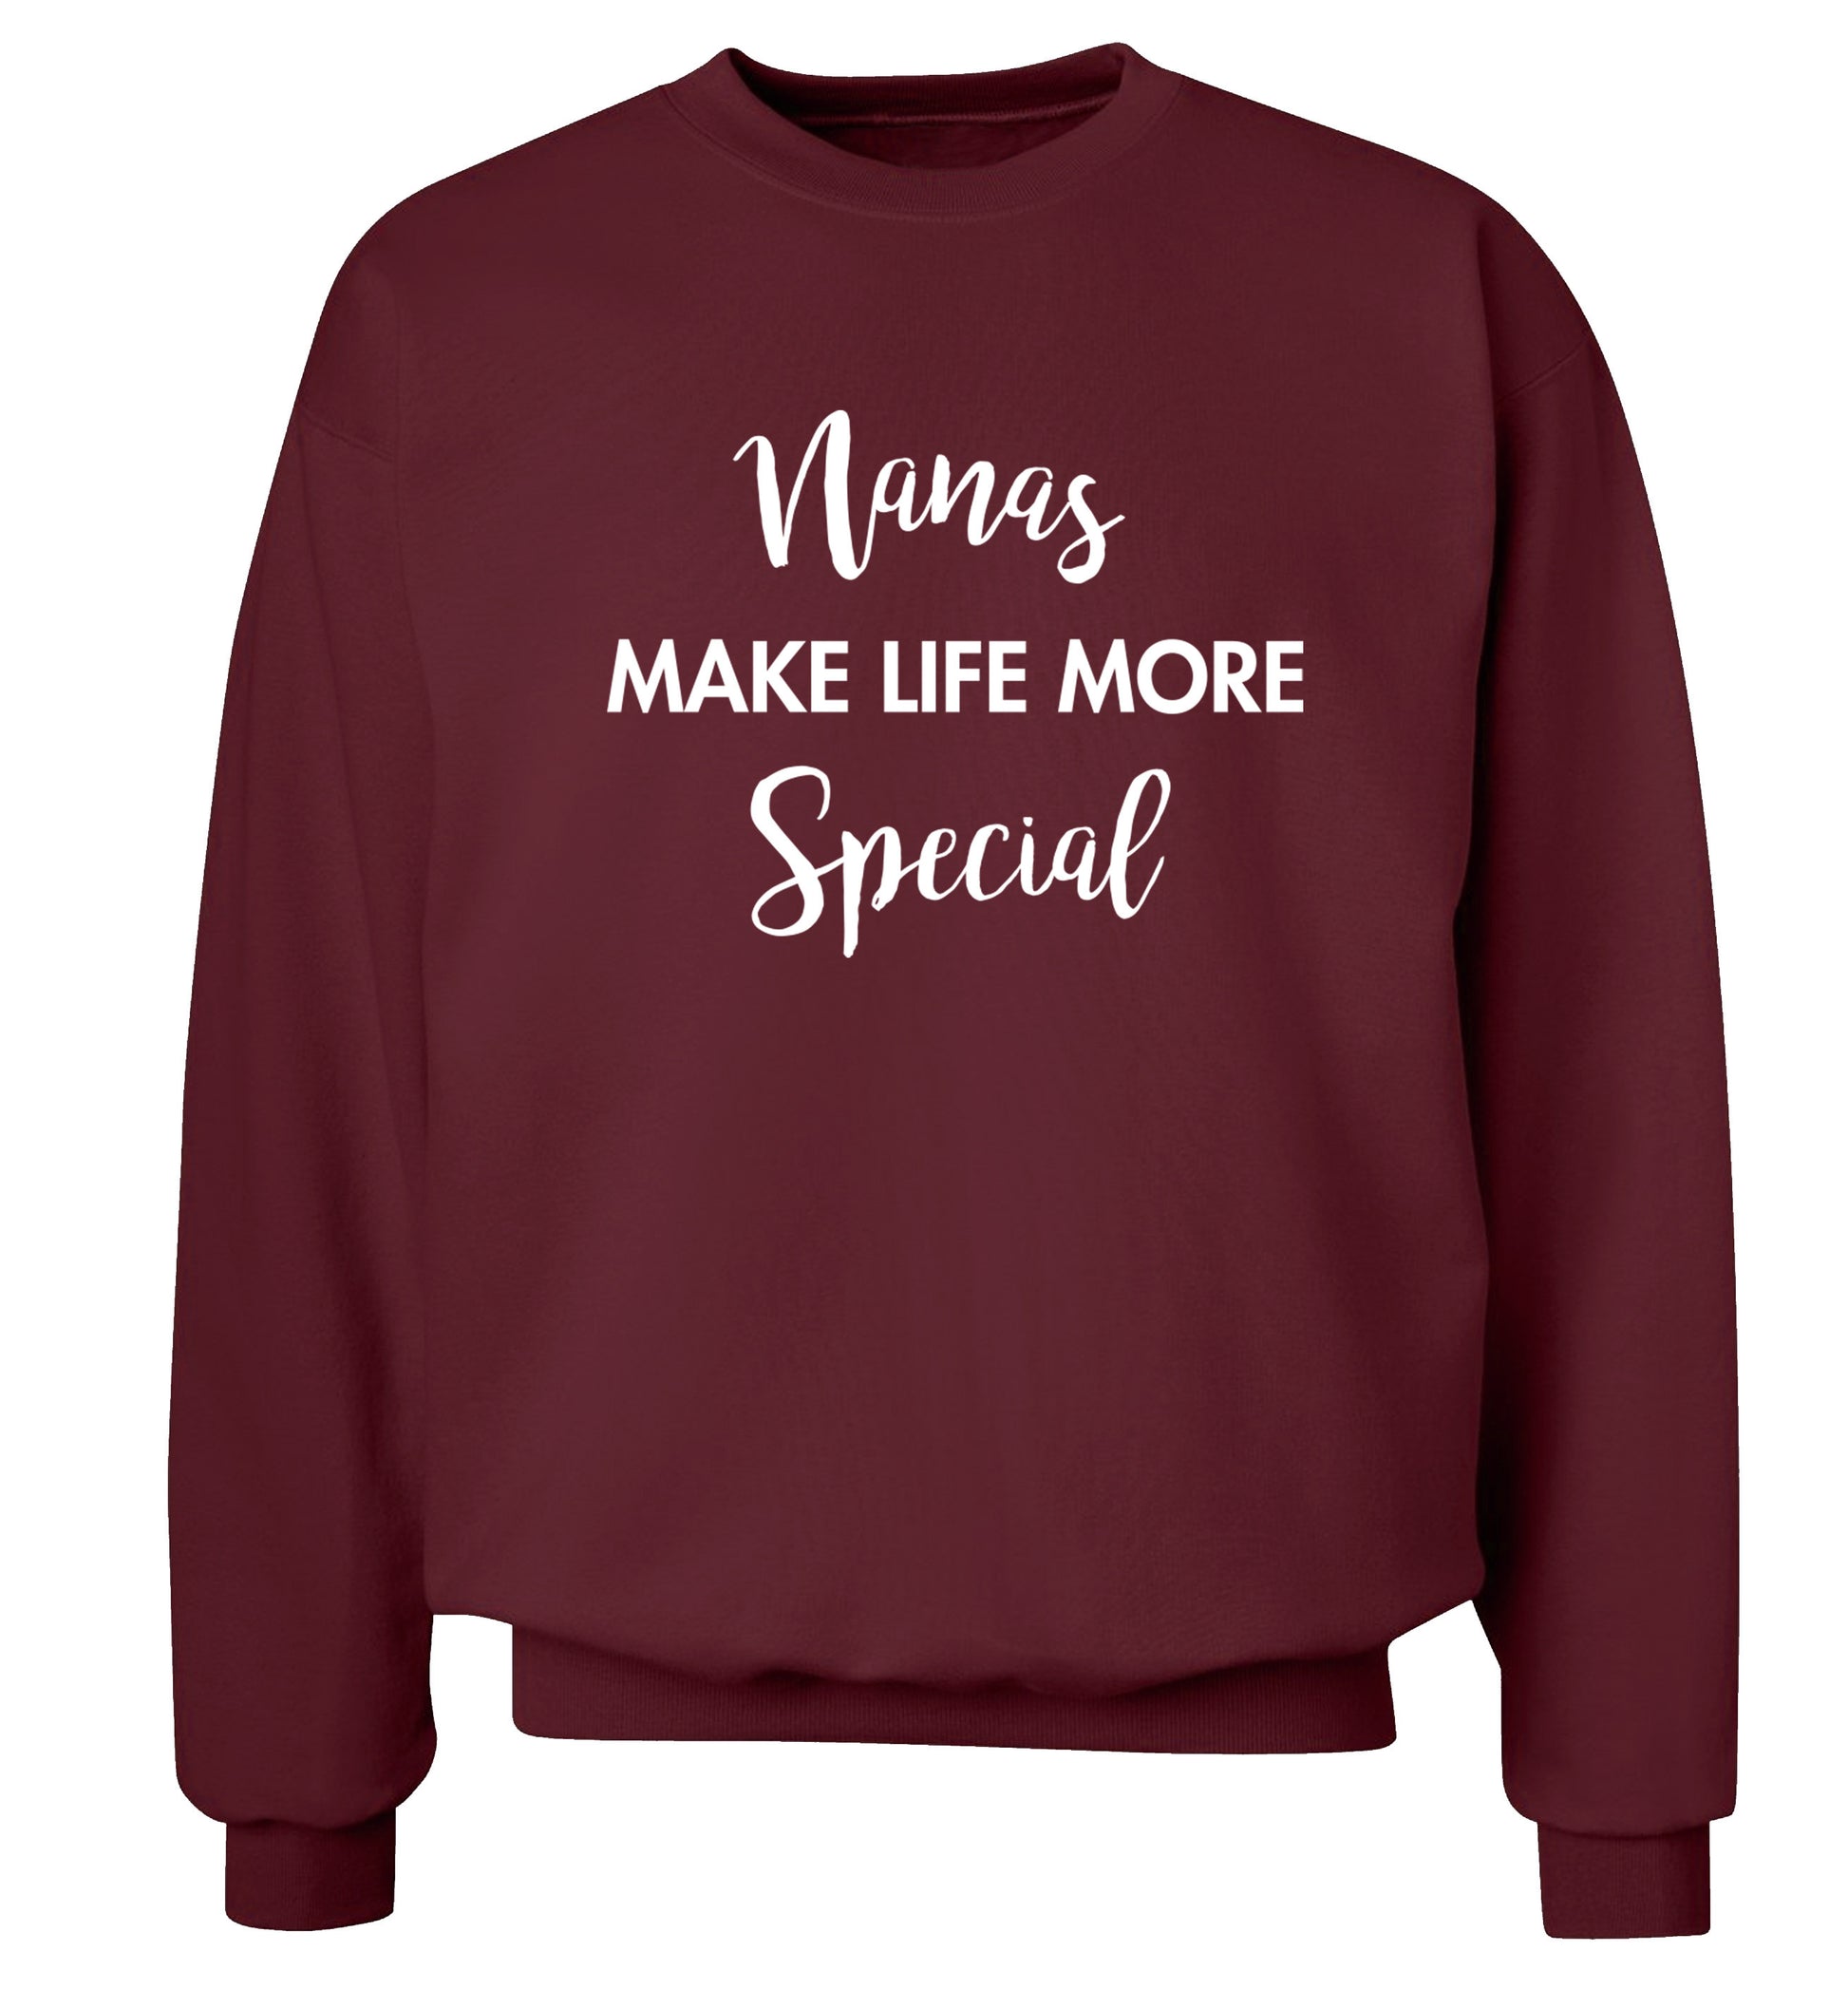 Nanas make life more special Adult's unisex maroon Sweater 2XL